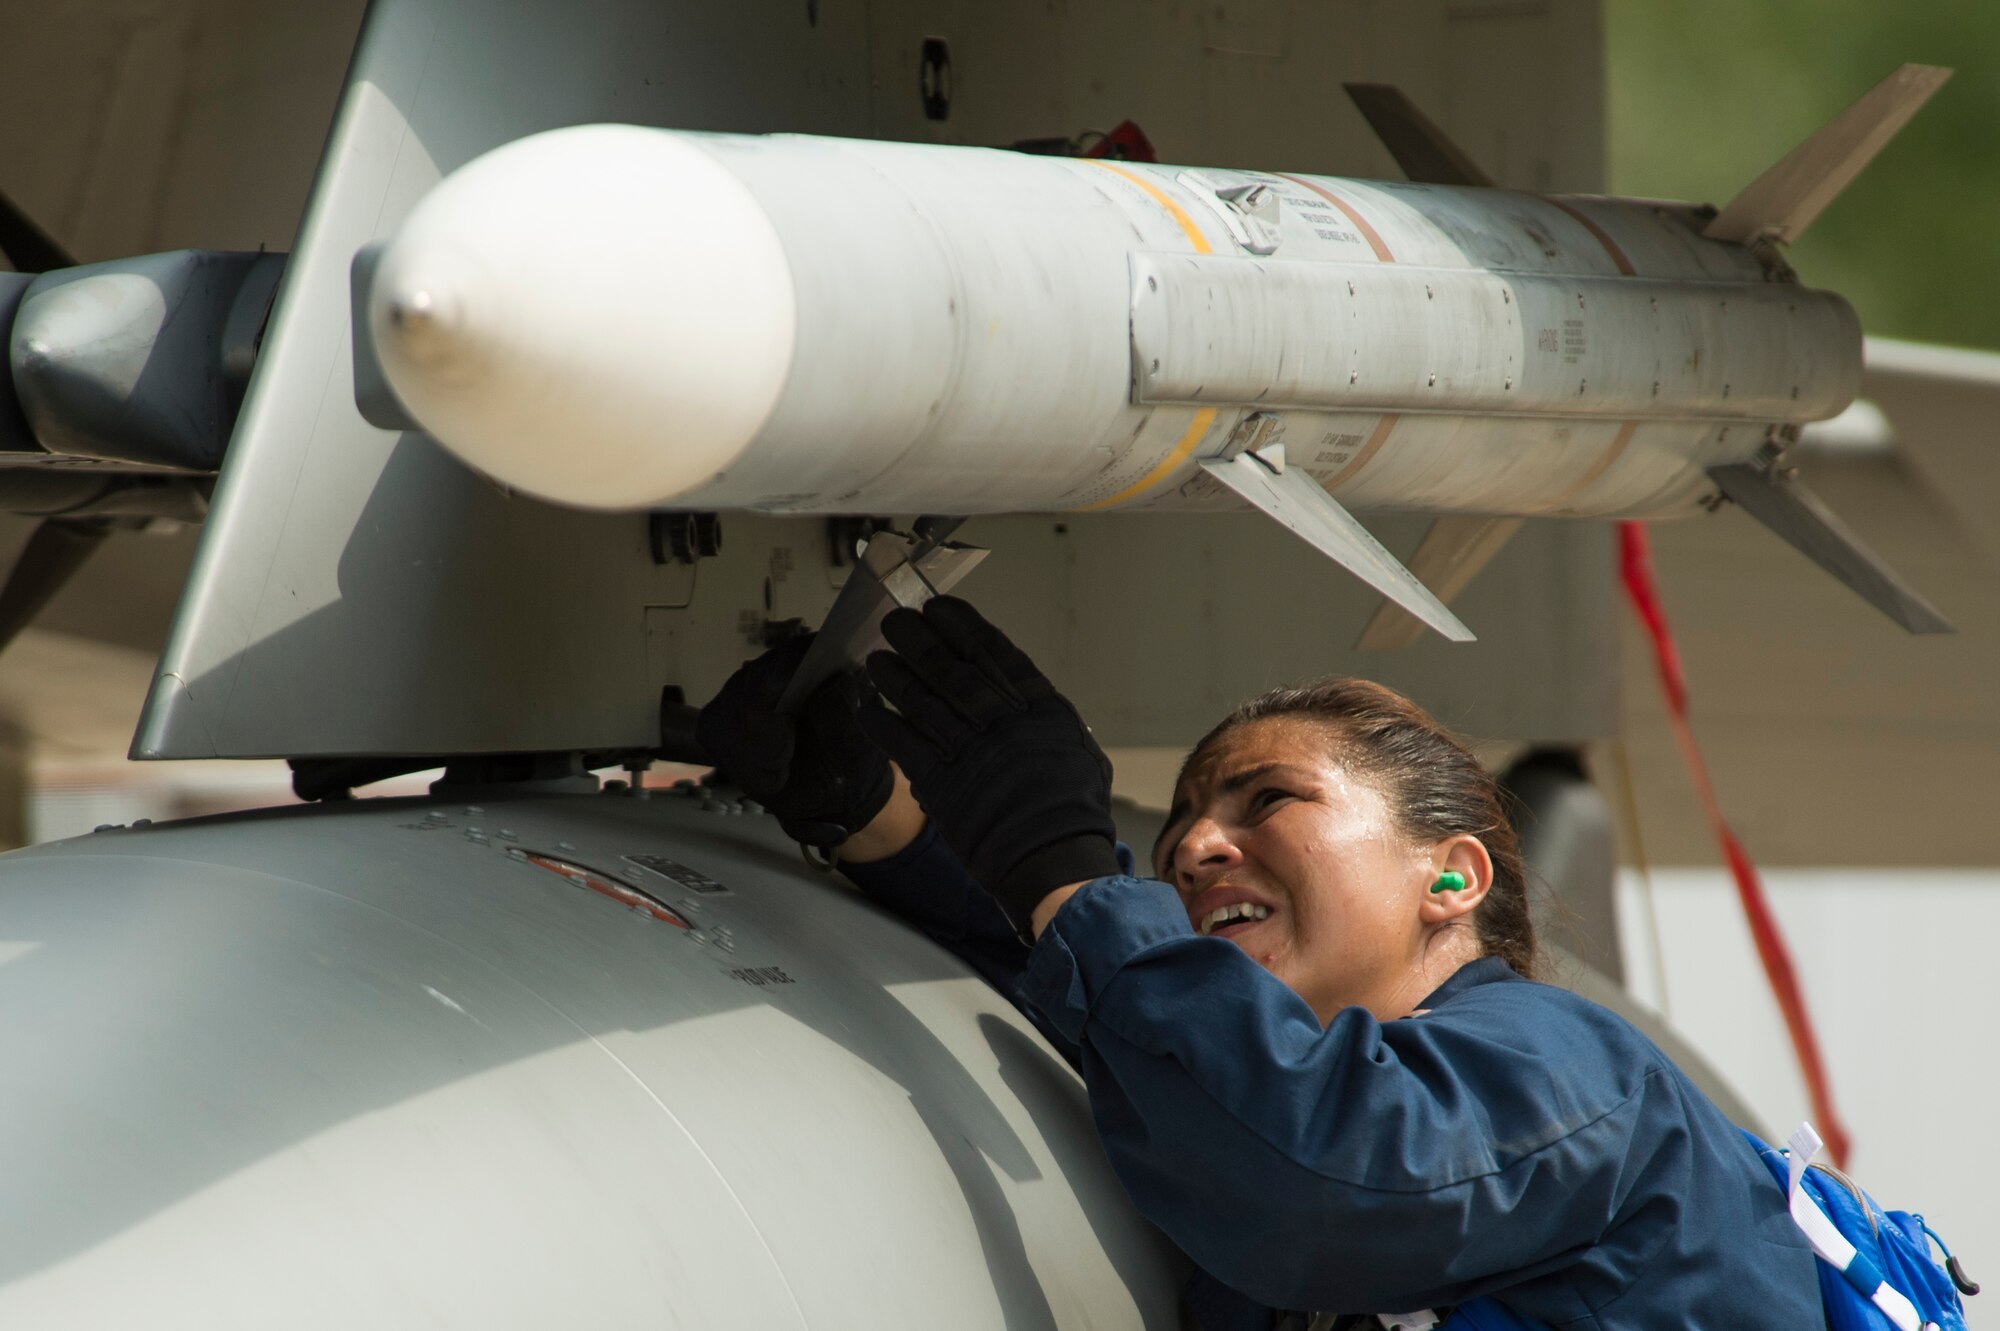 California Air National Guard Master Sgt. Audra Jimenez, a 194th Expeditionary Fighter Squadron weapons craftsman, affixes an AIM-120 advanced medium-range air-to-air missile onto an F-15C Eagle fighter aircraft on the flightline at Graf Ignatievo, Bulgaria, Sept. 8, 2016. Four of the squadron’s F-15Cs will conduct joint NATO air policing missions with the Bulgarian air force to police the host nation’s sovereign airspace Sept. 9-16, 2016. The squadron forward deployed to Graf Ignatievo from Campia Turzii, Romania, where they serve on a theater security package deployment to Europe as a part of Operation Atlantic Resolve. (U.S. Air Force photo by Staff Sgt. Joe W. McFadden) 